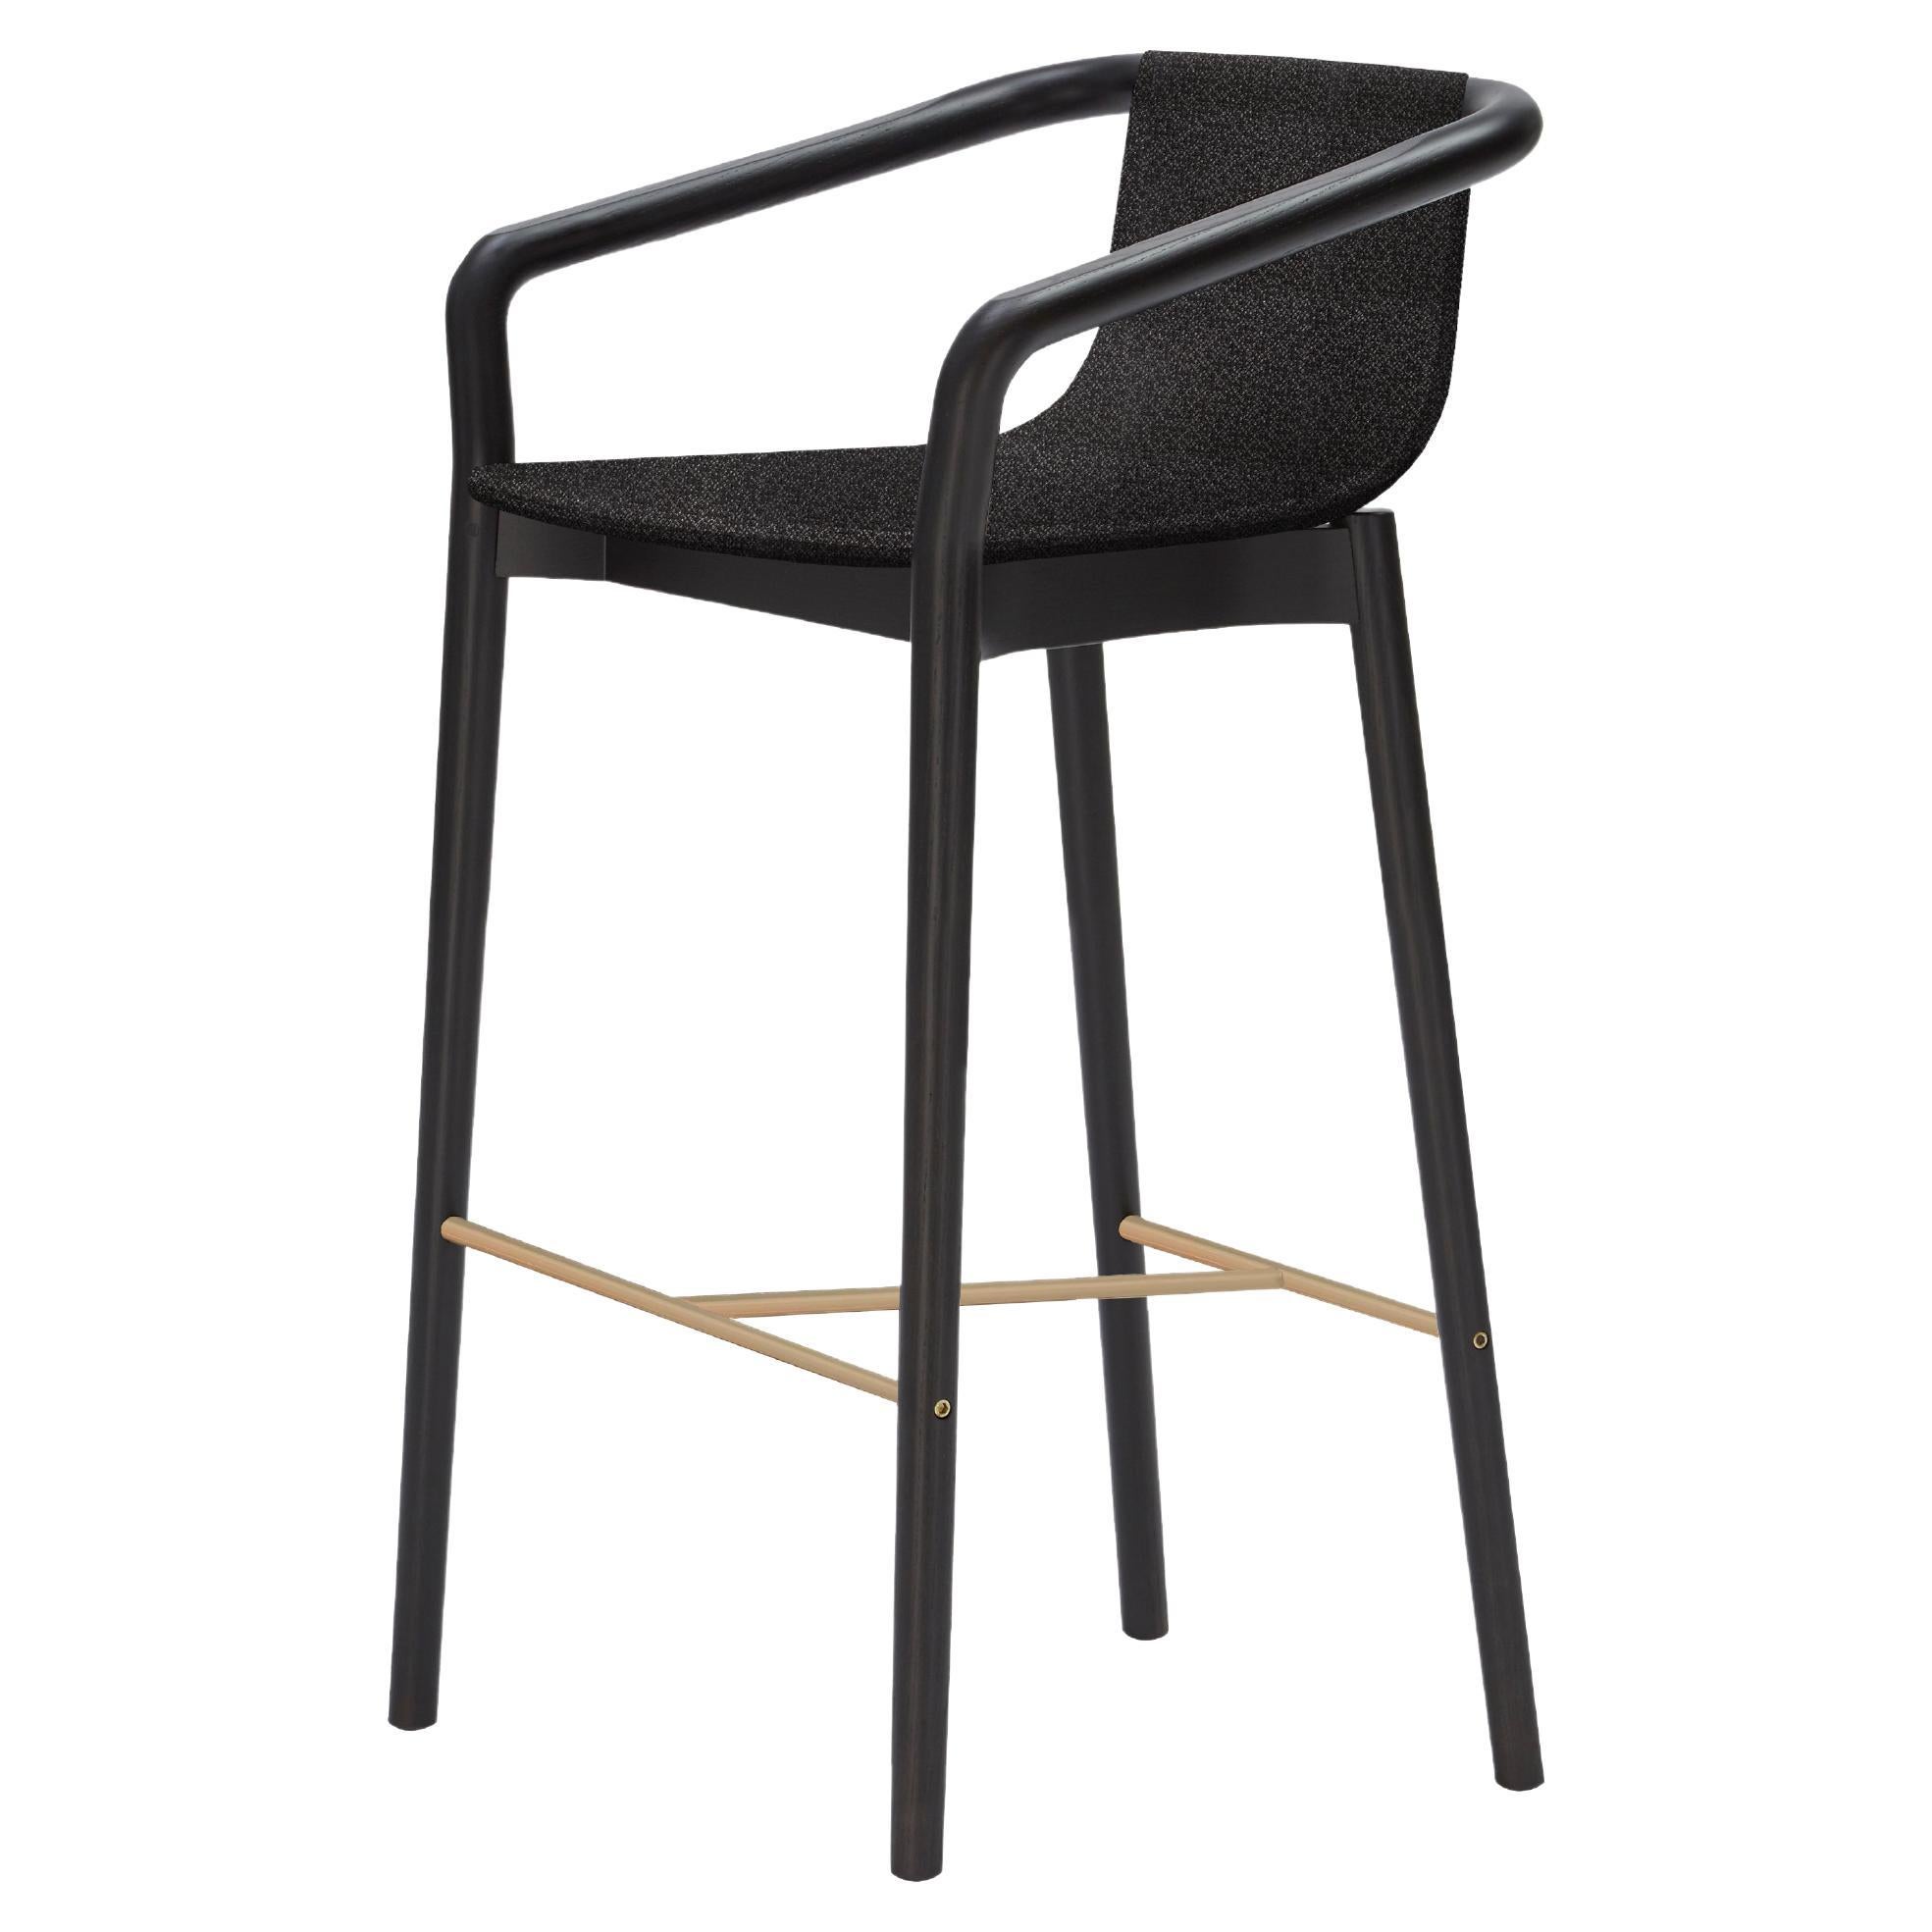 SP01 Thomas Low Bar Stool in Milan Black Fabric, Made in Italy